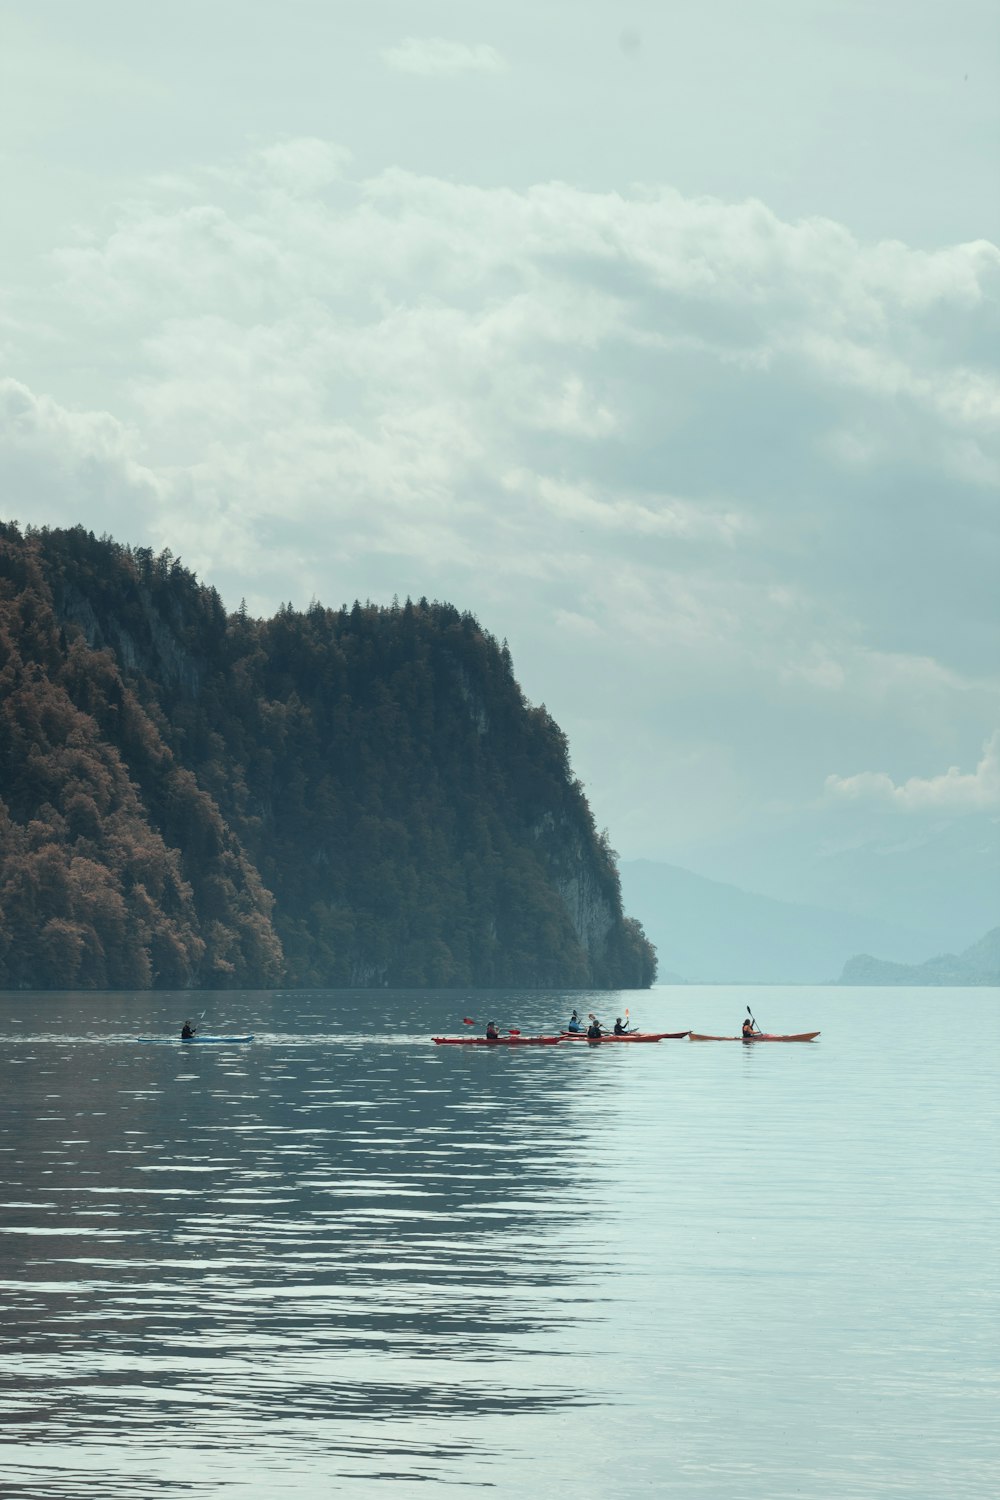 a group of people in canoes paddling on a large body of water